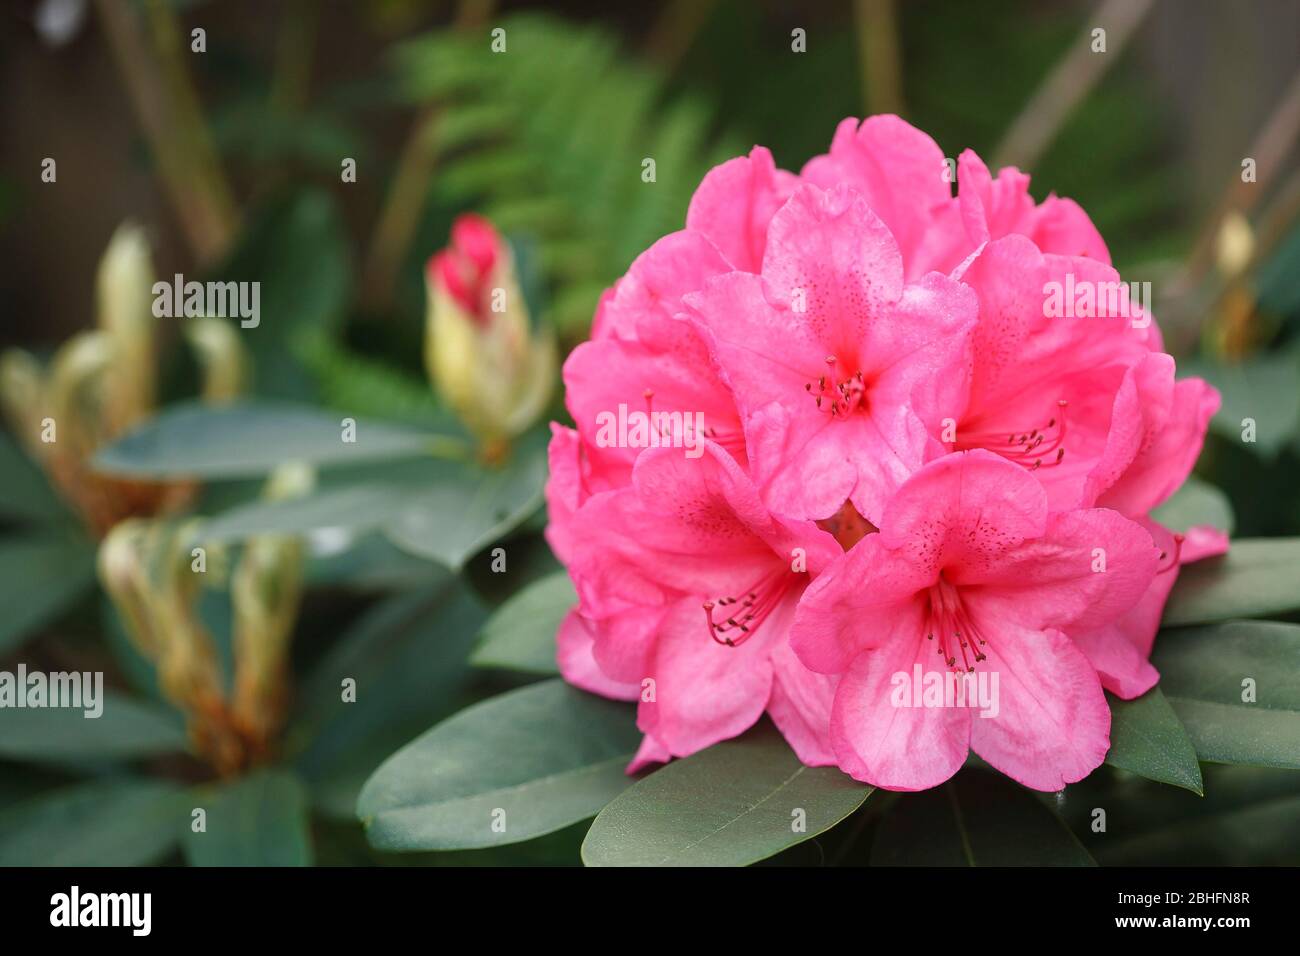 Pink rhododendron flower close up, rhododendrons evergreen shrubs, UK Stock Photo